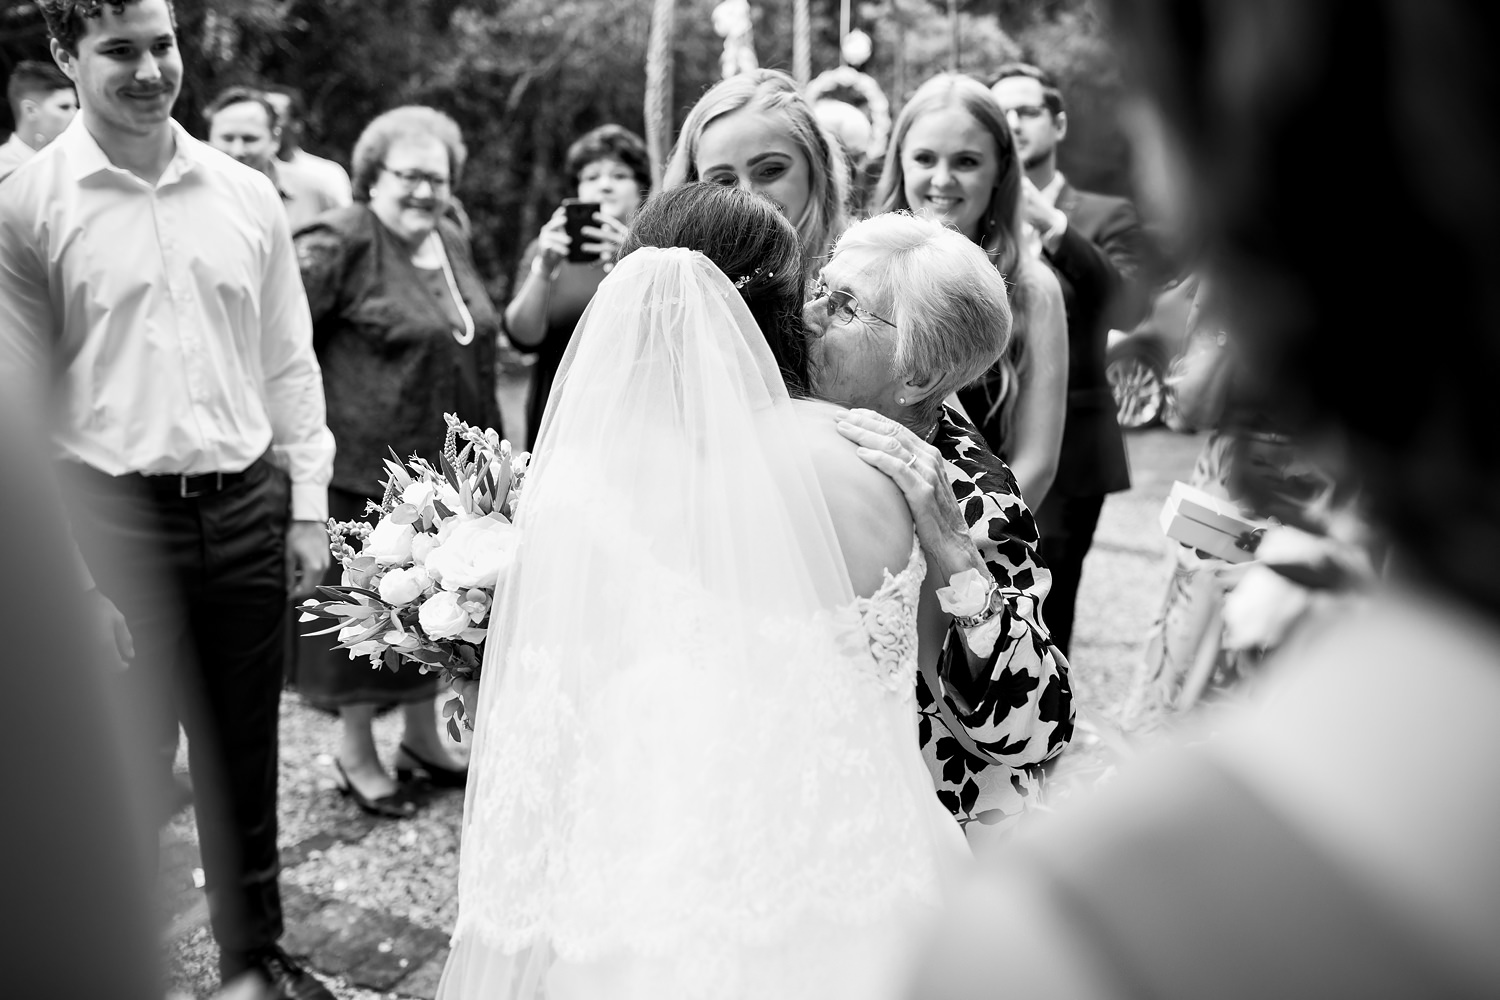 The bride has a tender moment with her grandmother as they embrace